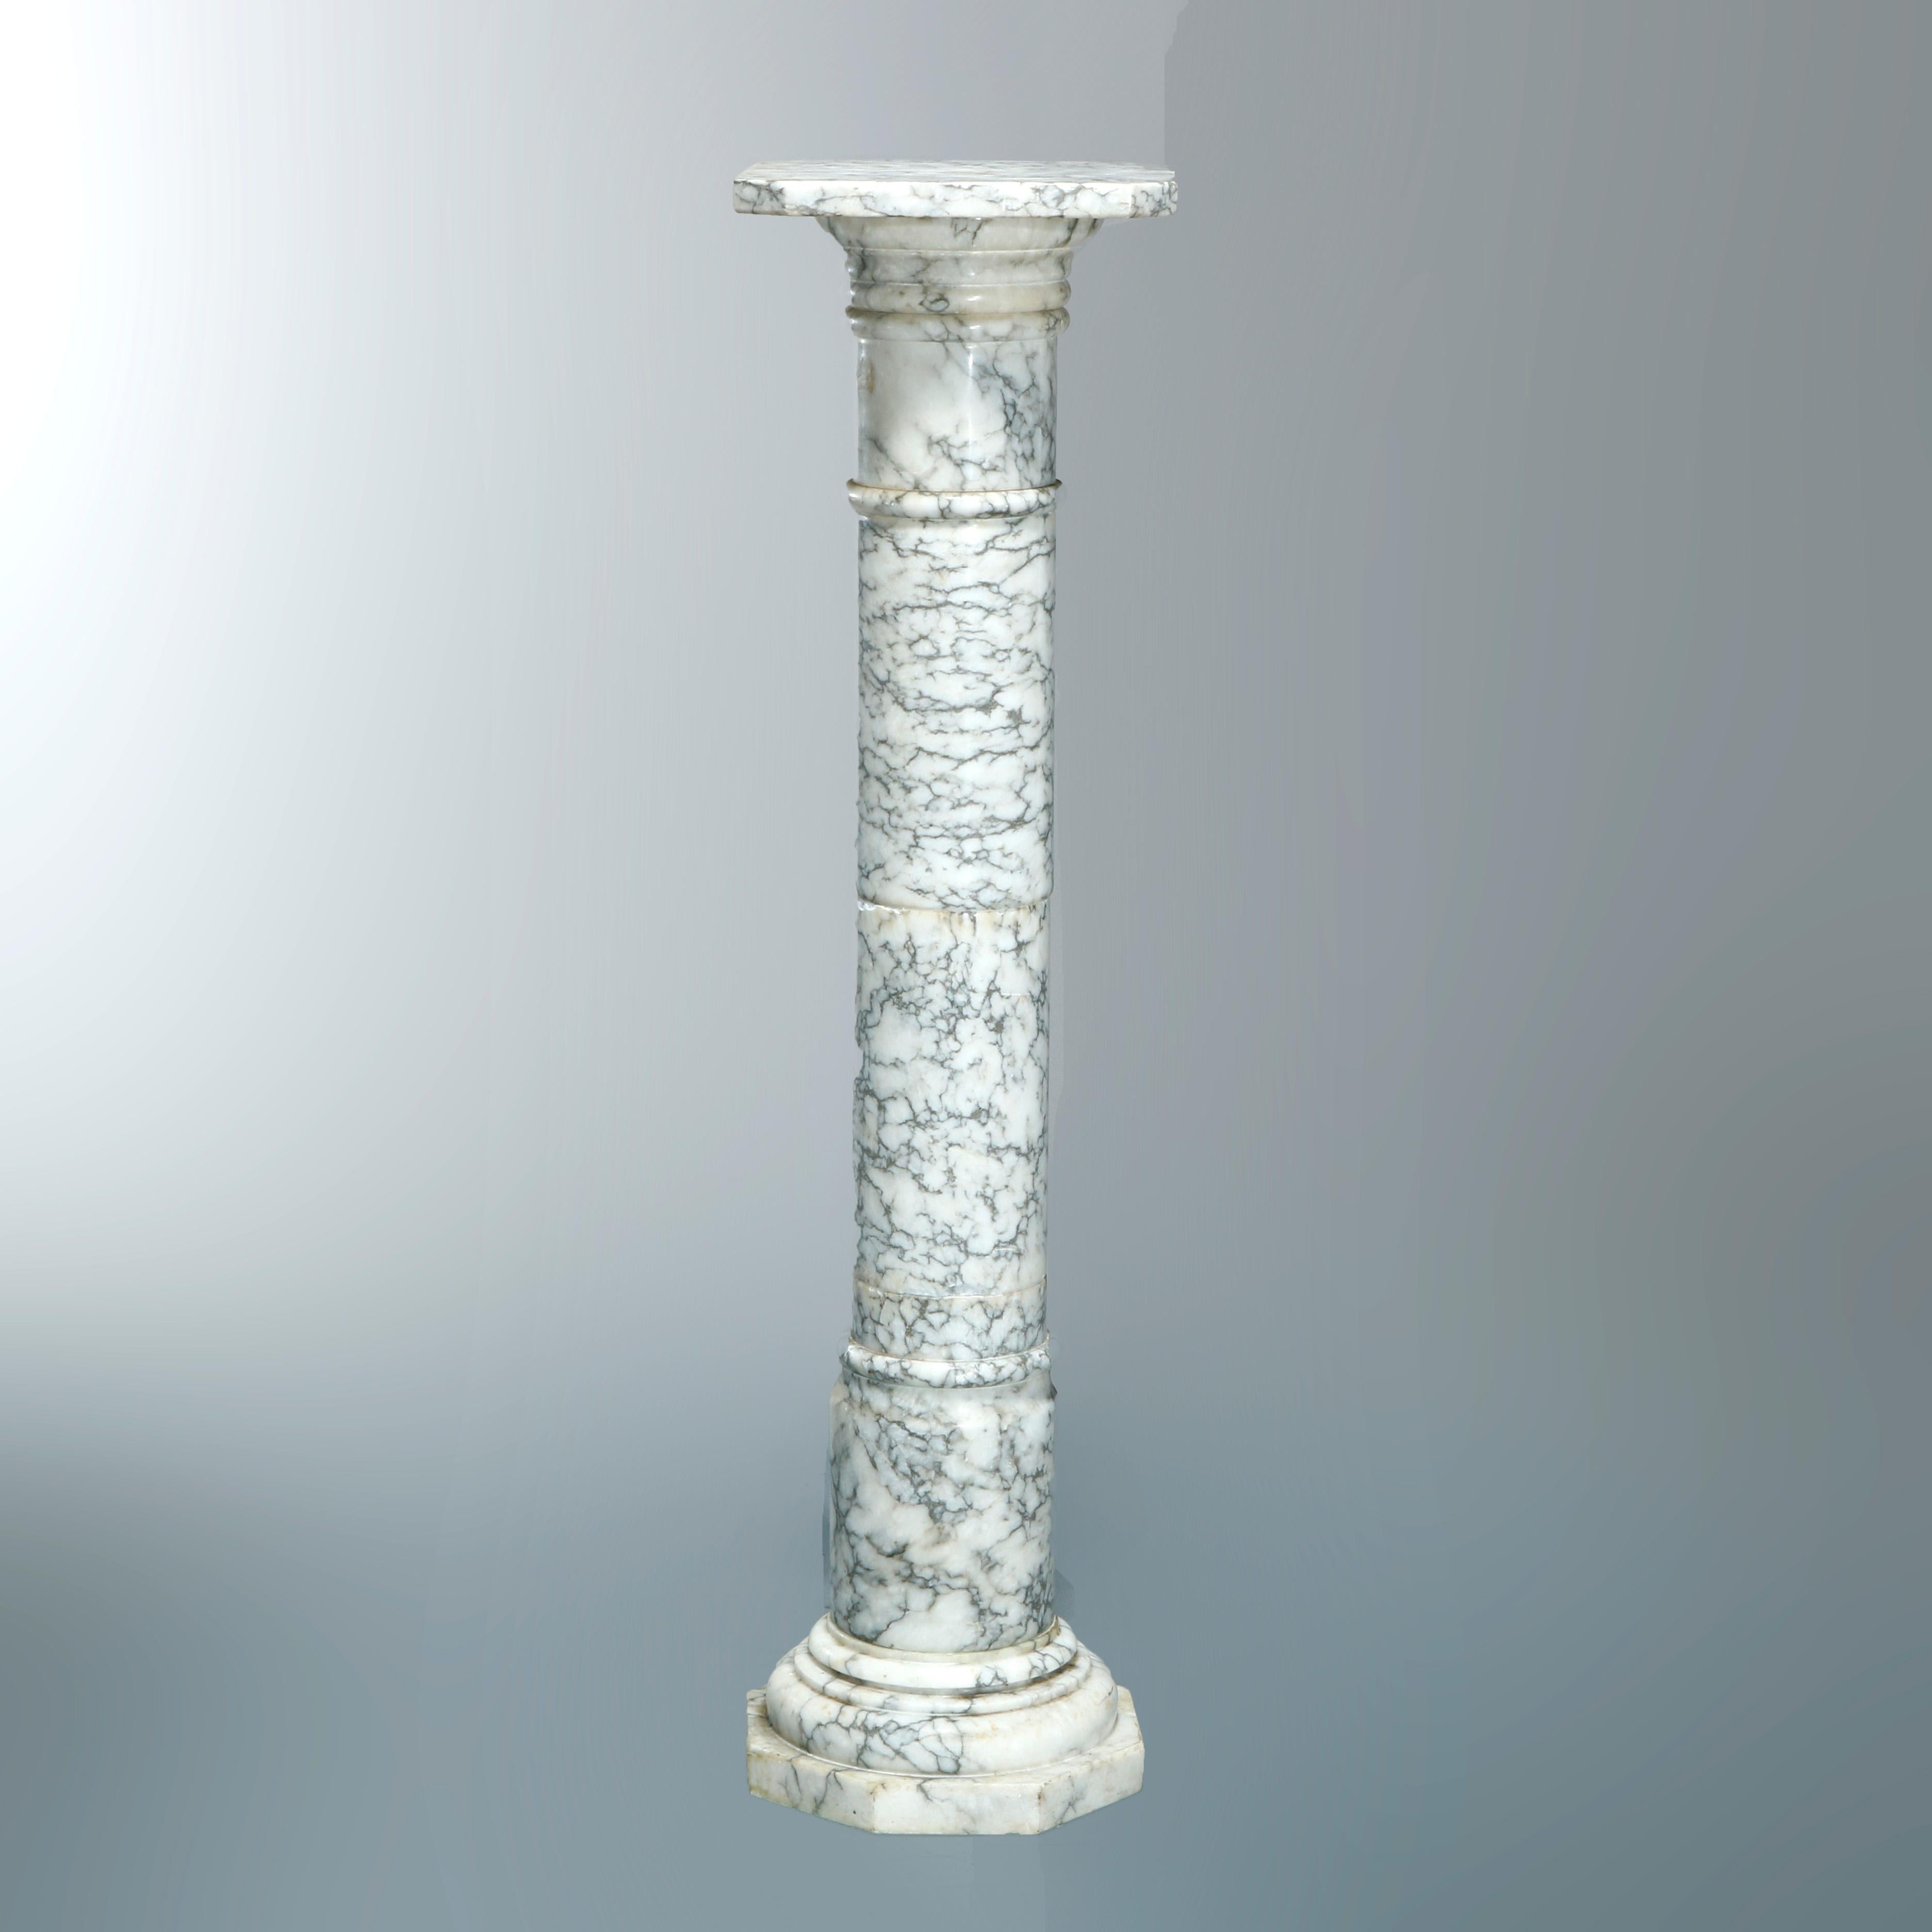 Antique Neo-Classical Variegated Marble Sculpture Display Pedestal, circa 1900 For Sale 3